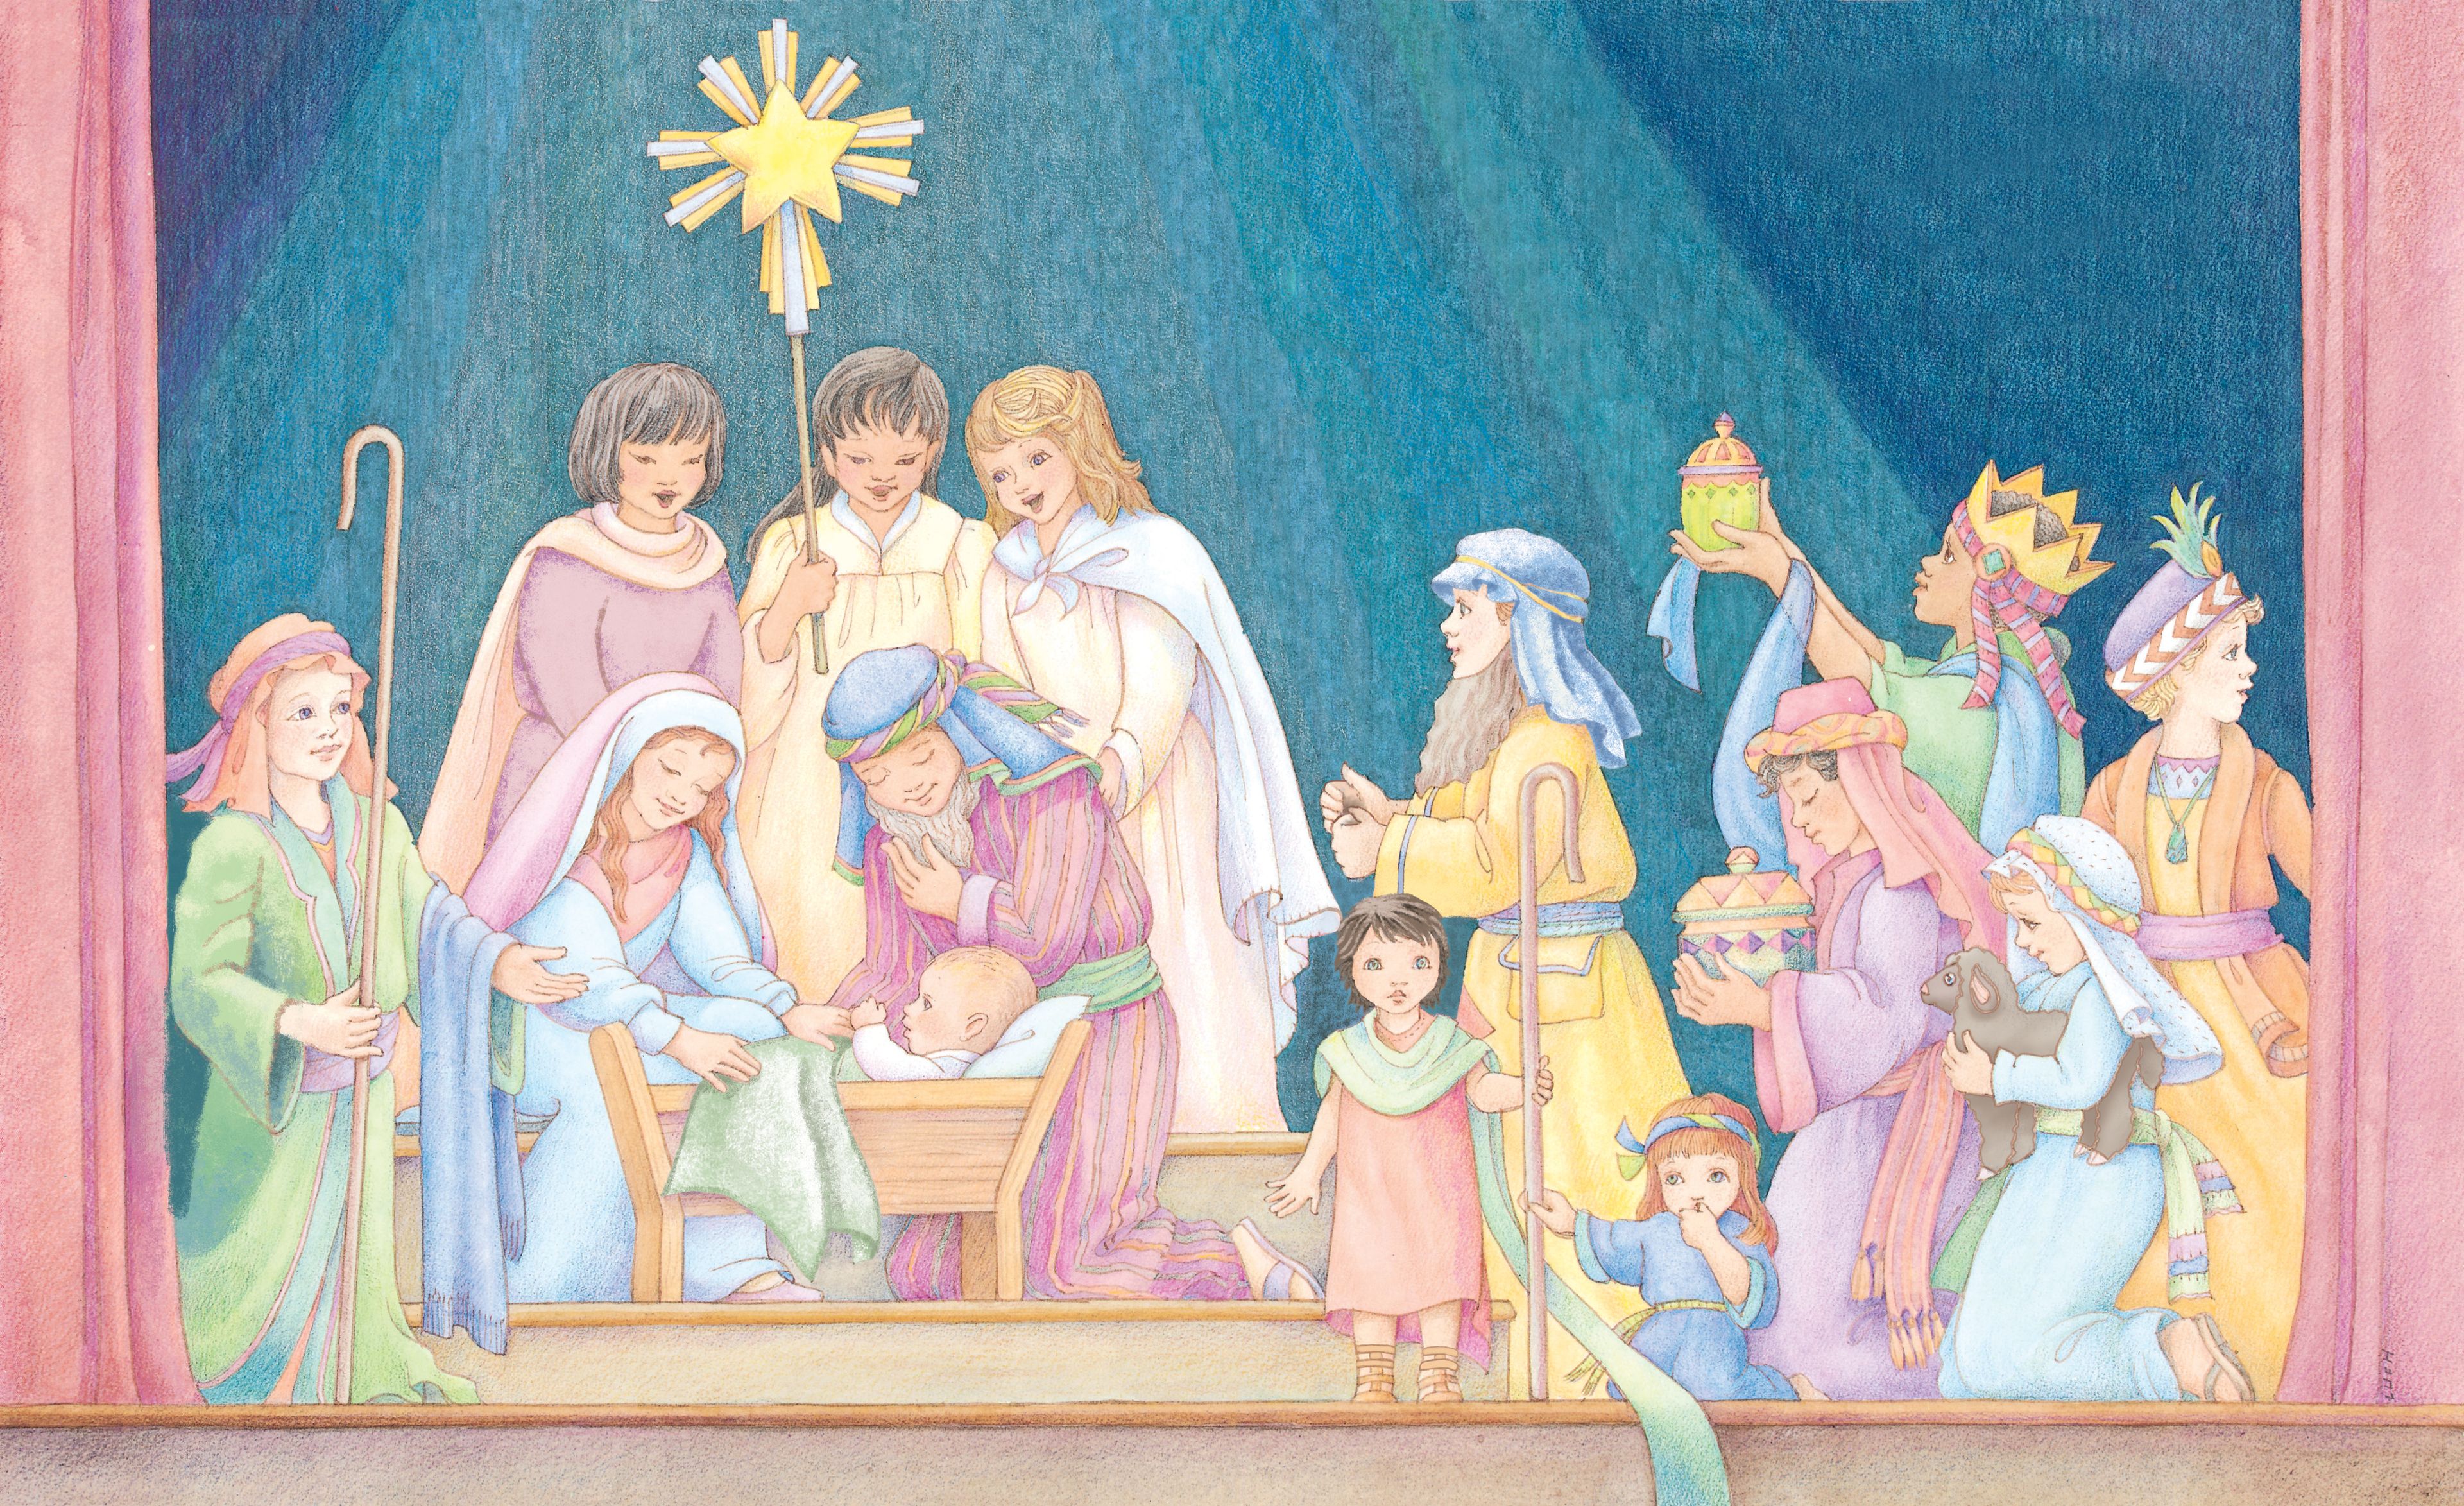 A group of children on a stage, reenacting the Nativity scene. From the section “The Savior” in the Children’s Songbook, pages 32–33; watercolor illustration by Phyllis Luch.